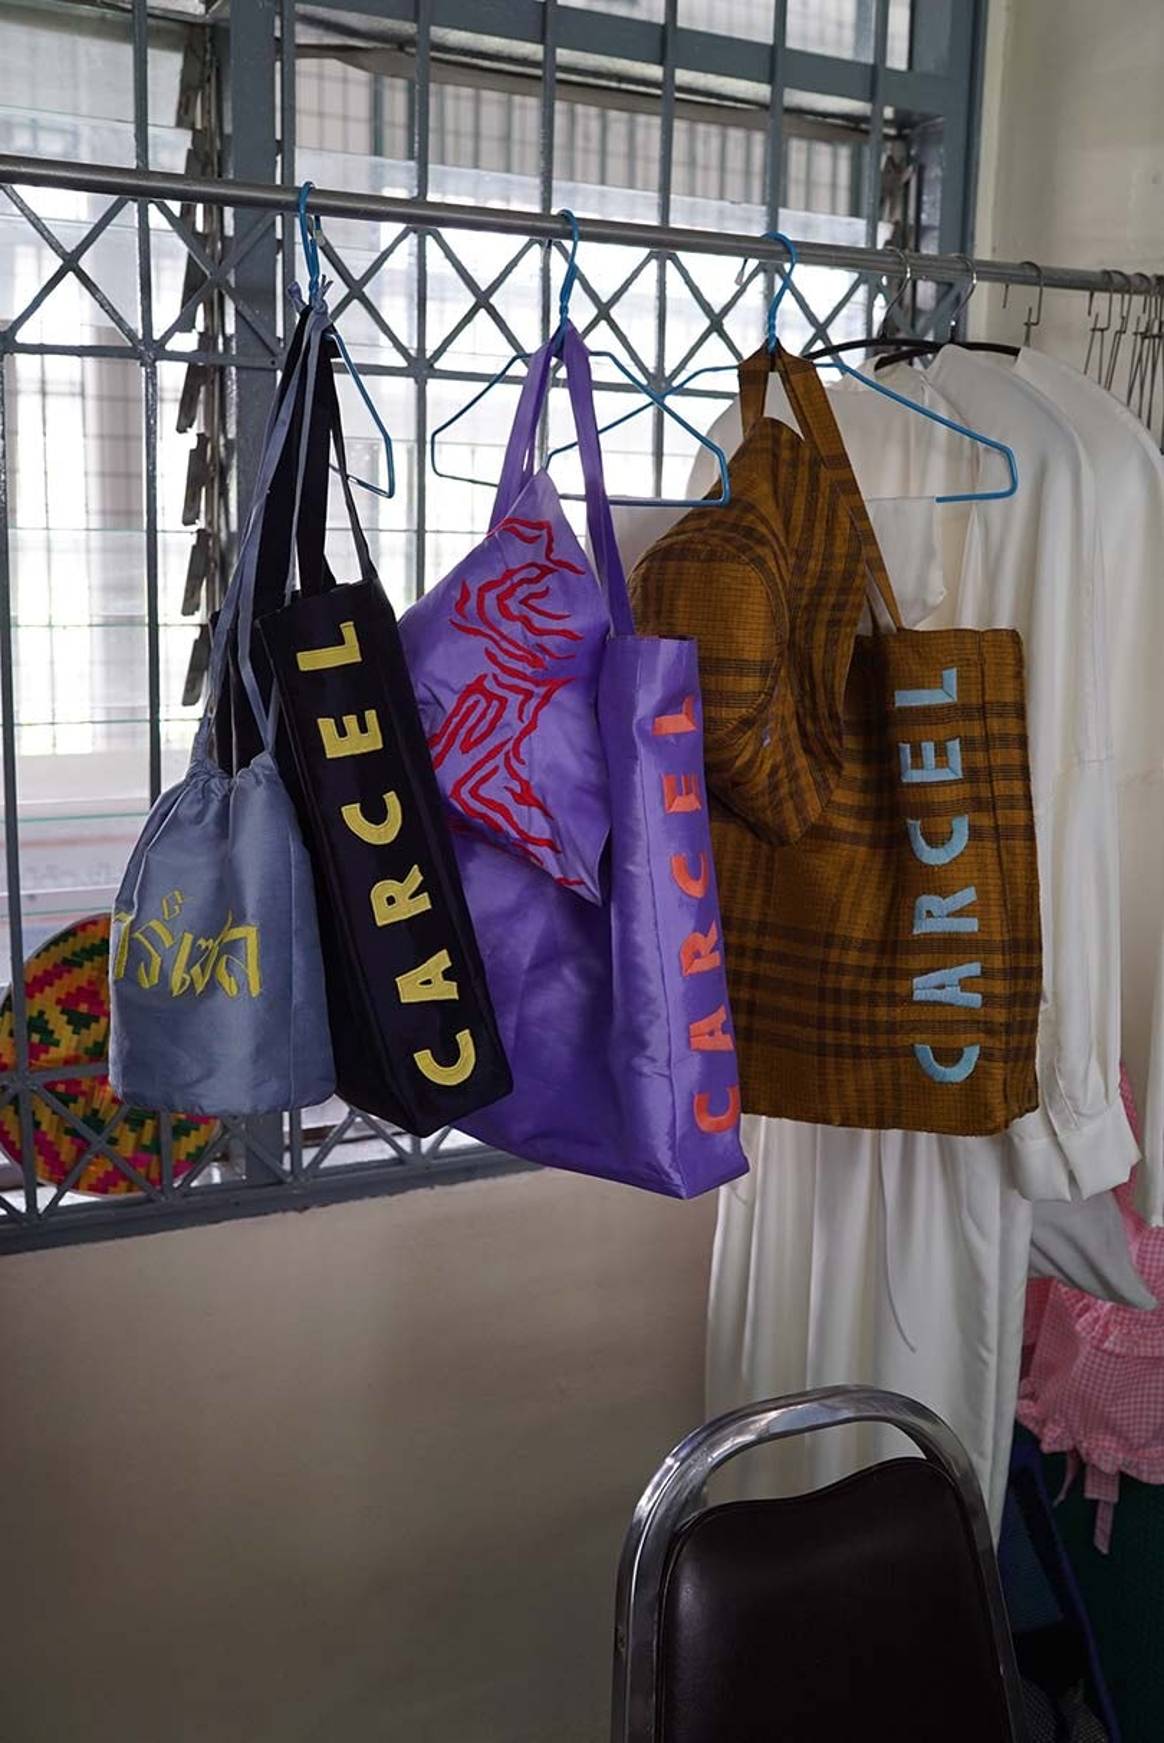 Carcel: the sustainable fashion brand giving opportunities to women in prisons